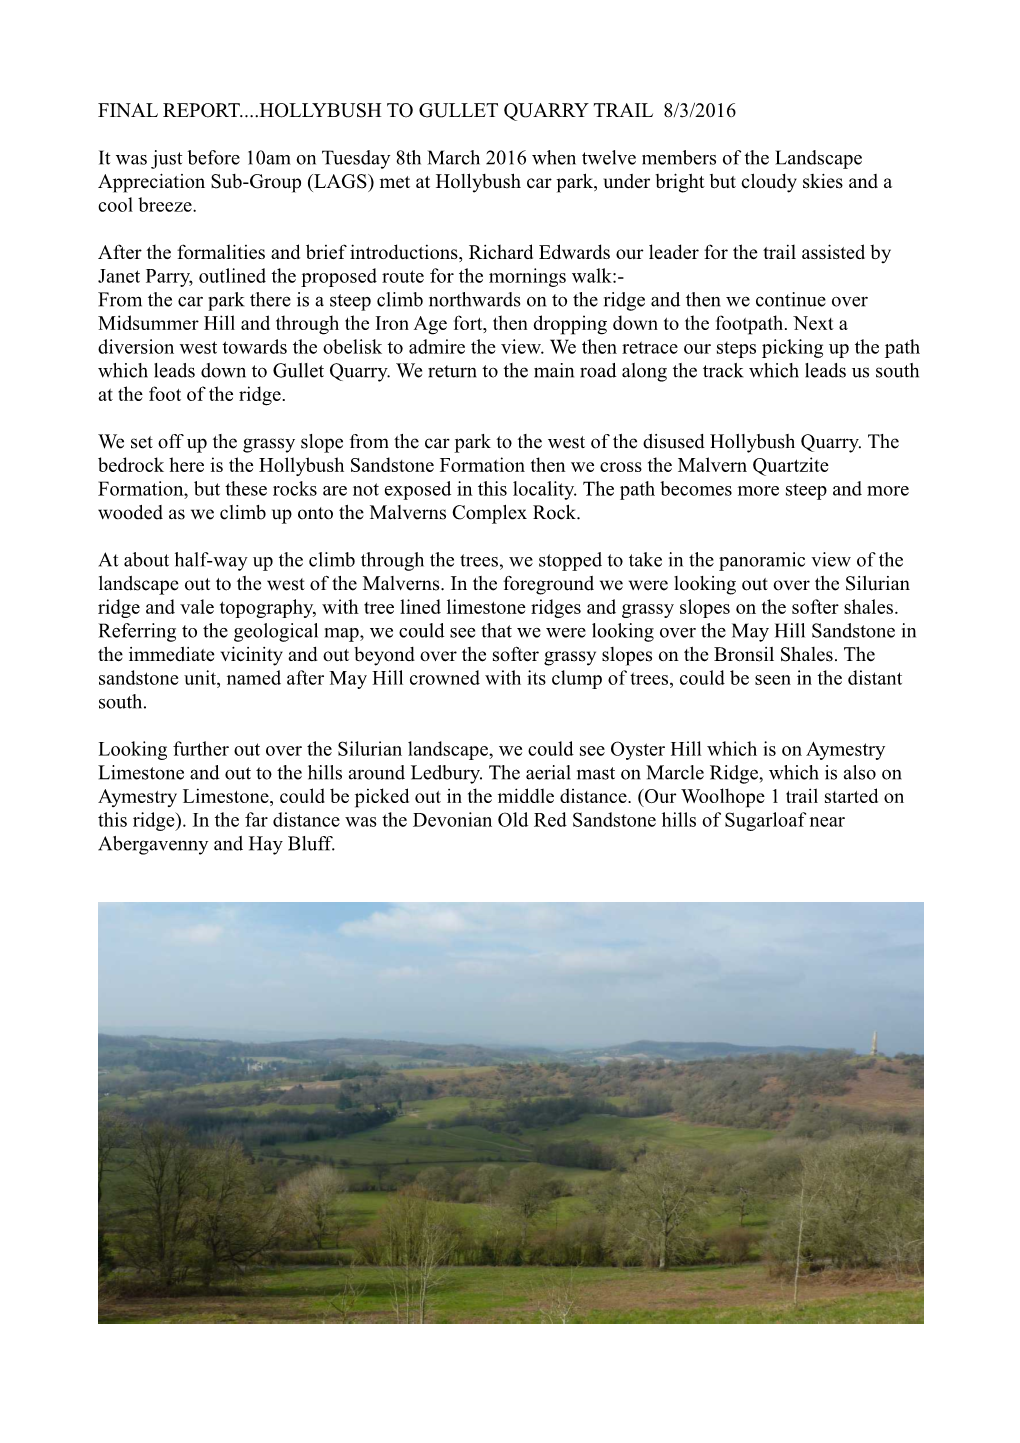 FINAL REPORT...HOLLYBUSH to GULLET QUARRY TRAIL 8/3/2016 It Was Just Before 10Am on Tuesday 8Th March 2016 When Twelve Members